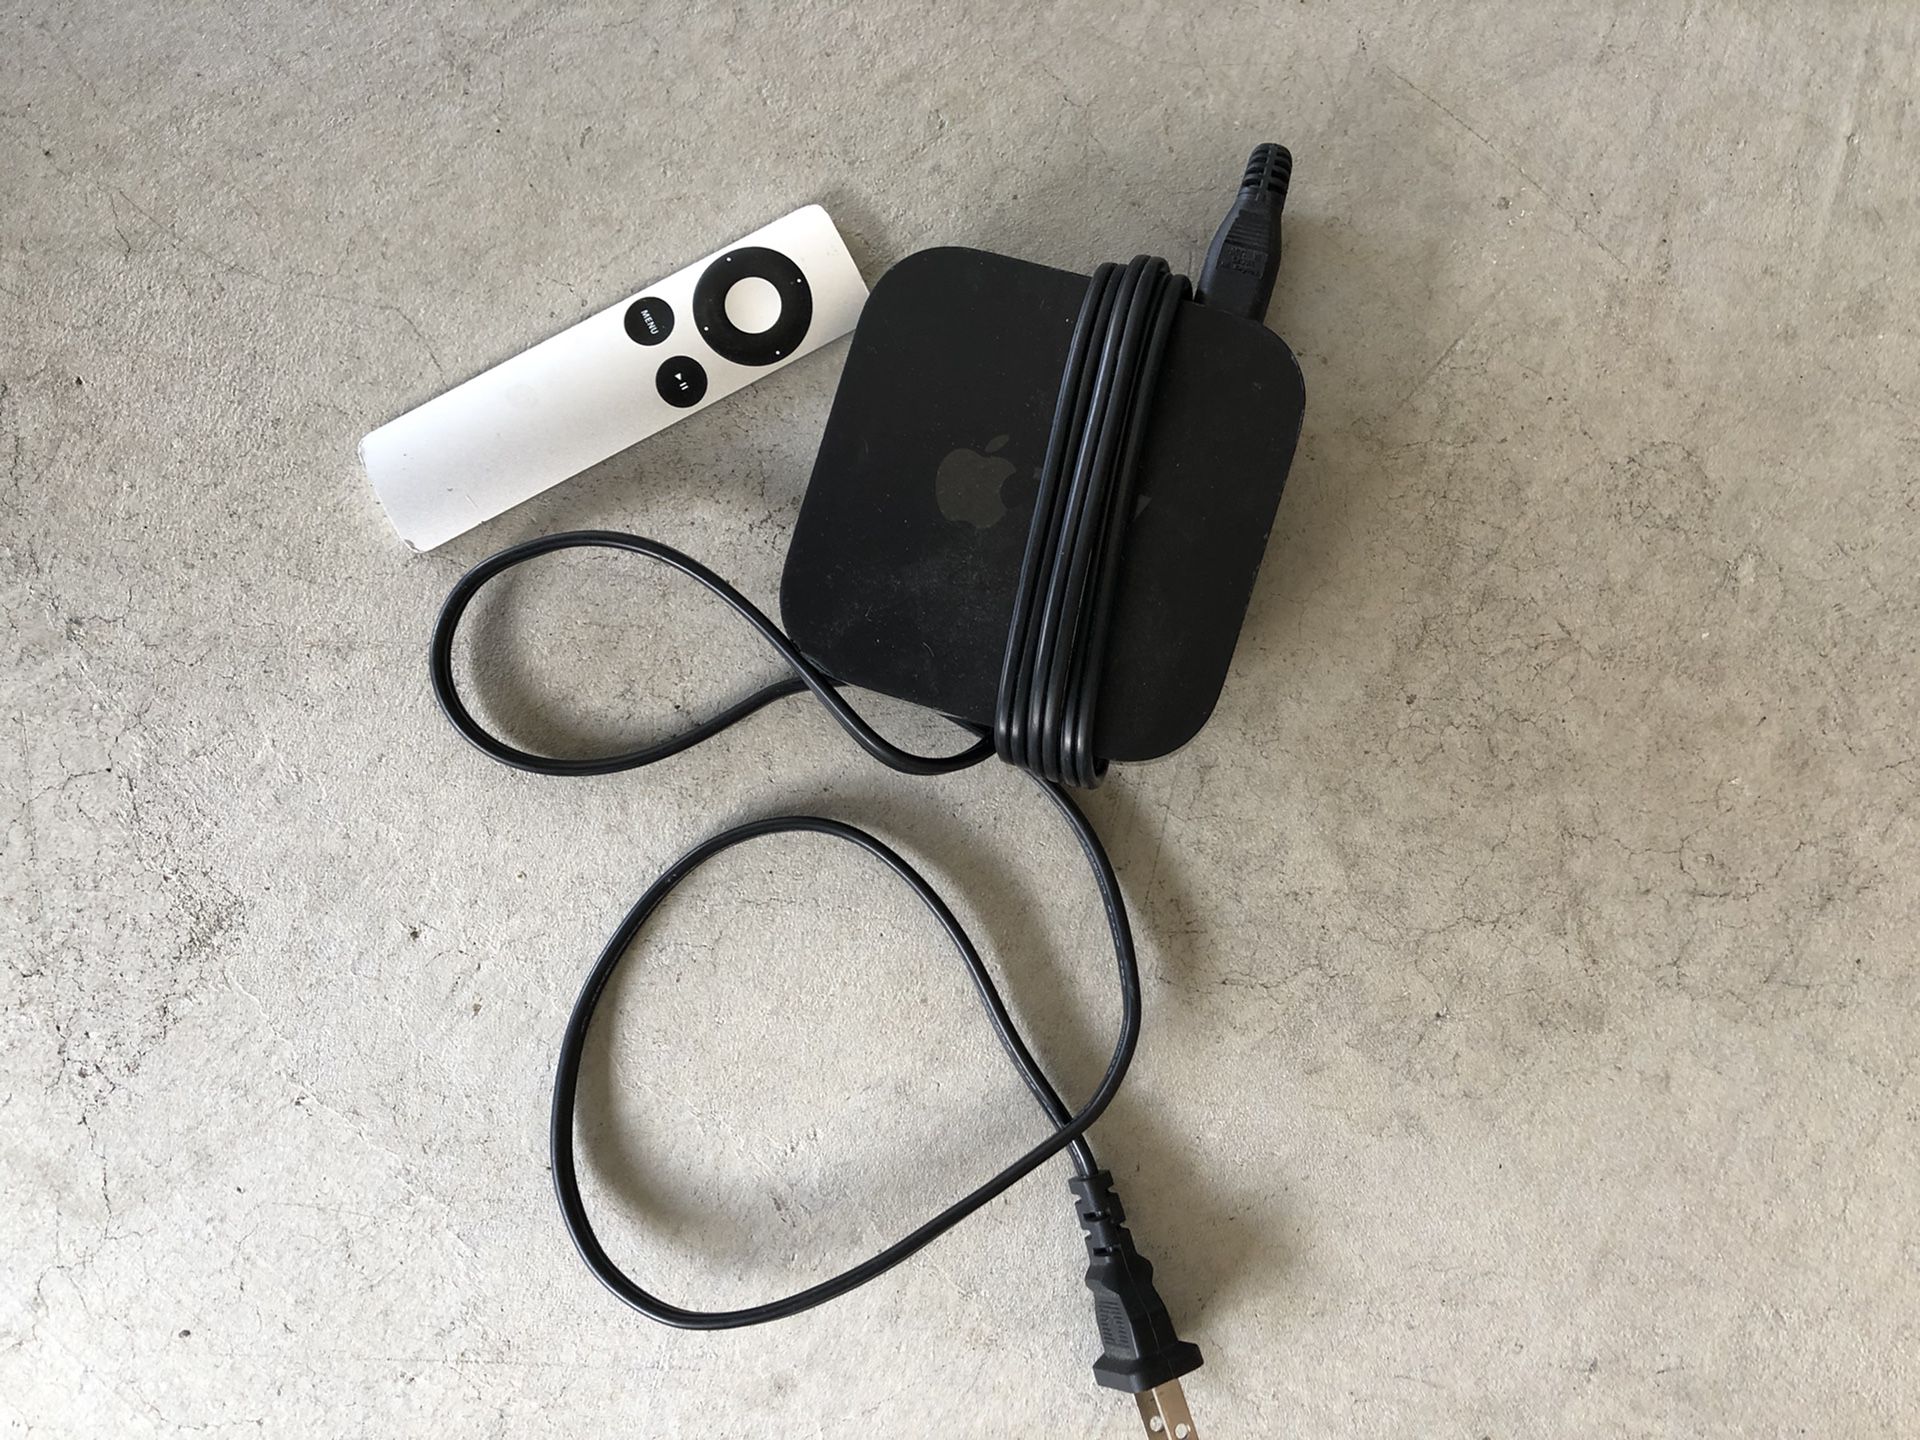 Apple TV first generation. Working condition